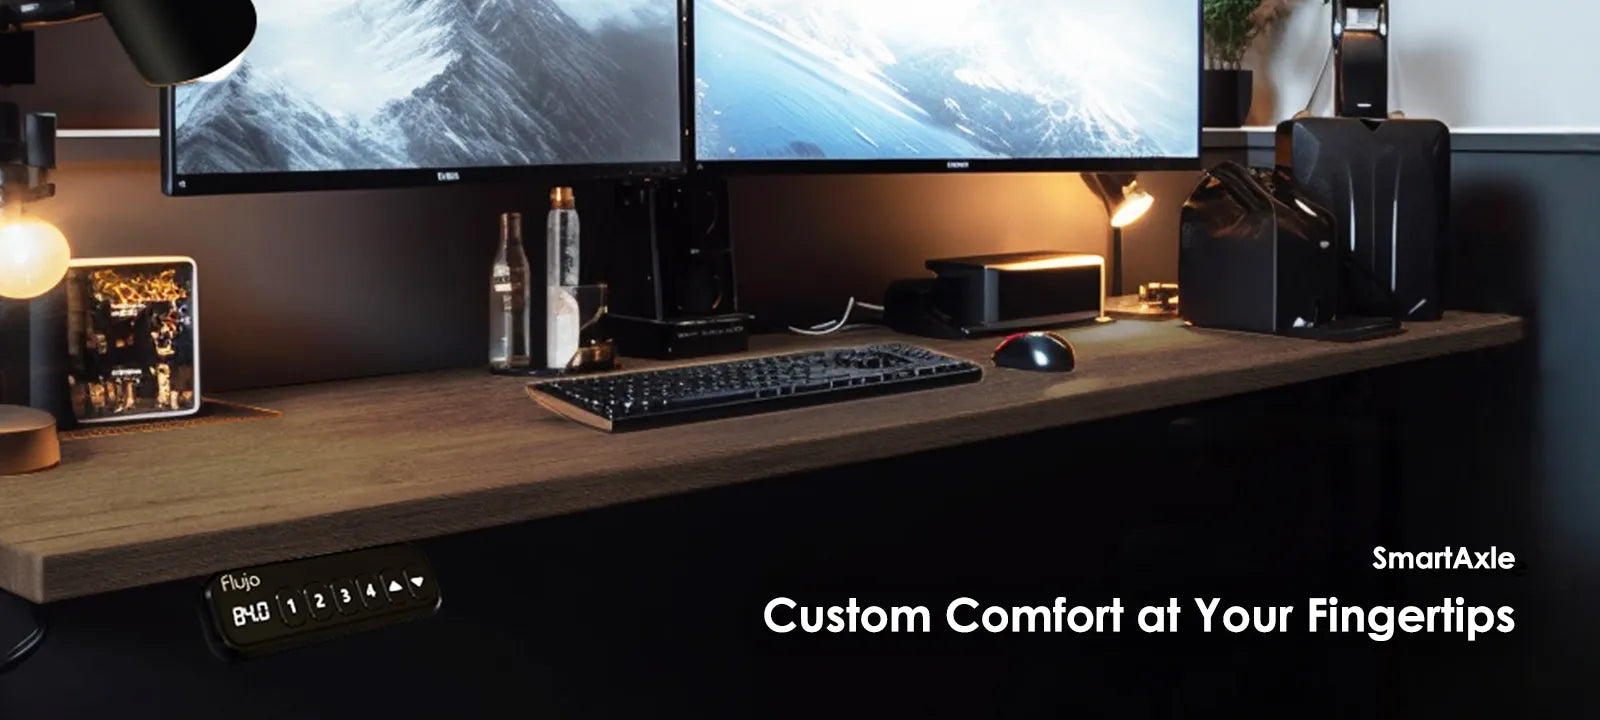 Flujio SmartAxle Standing Desk in use, showcasing custom comfort setup with multiple monitors.